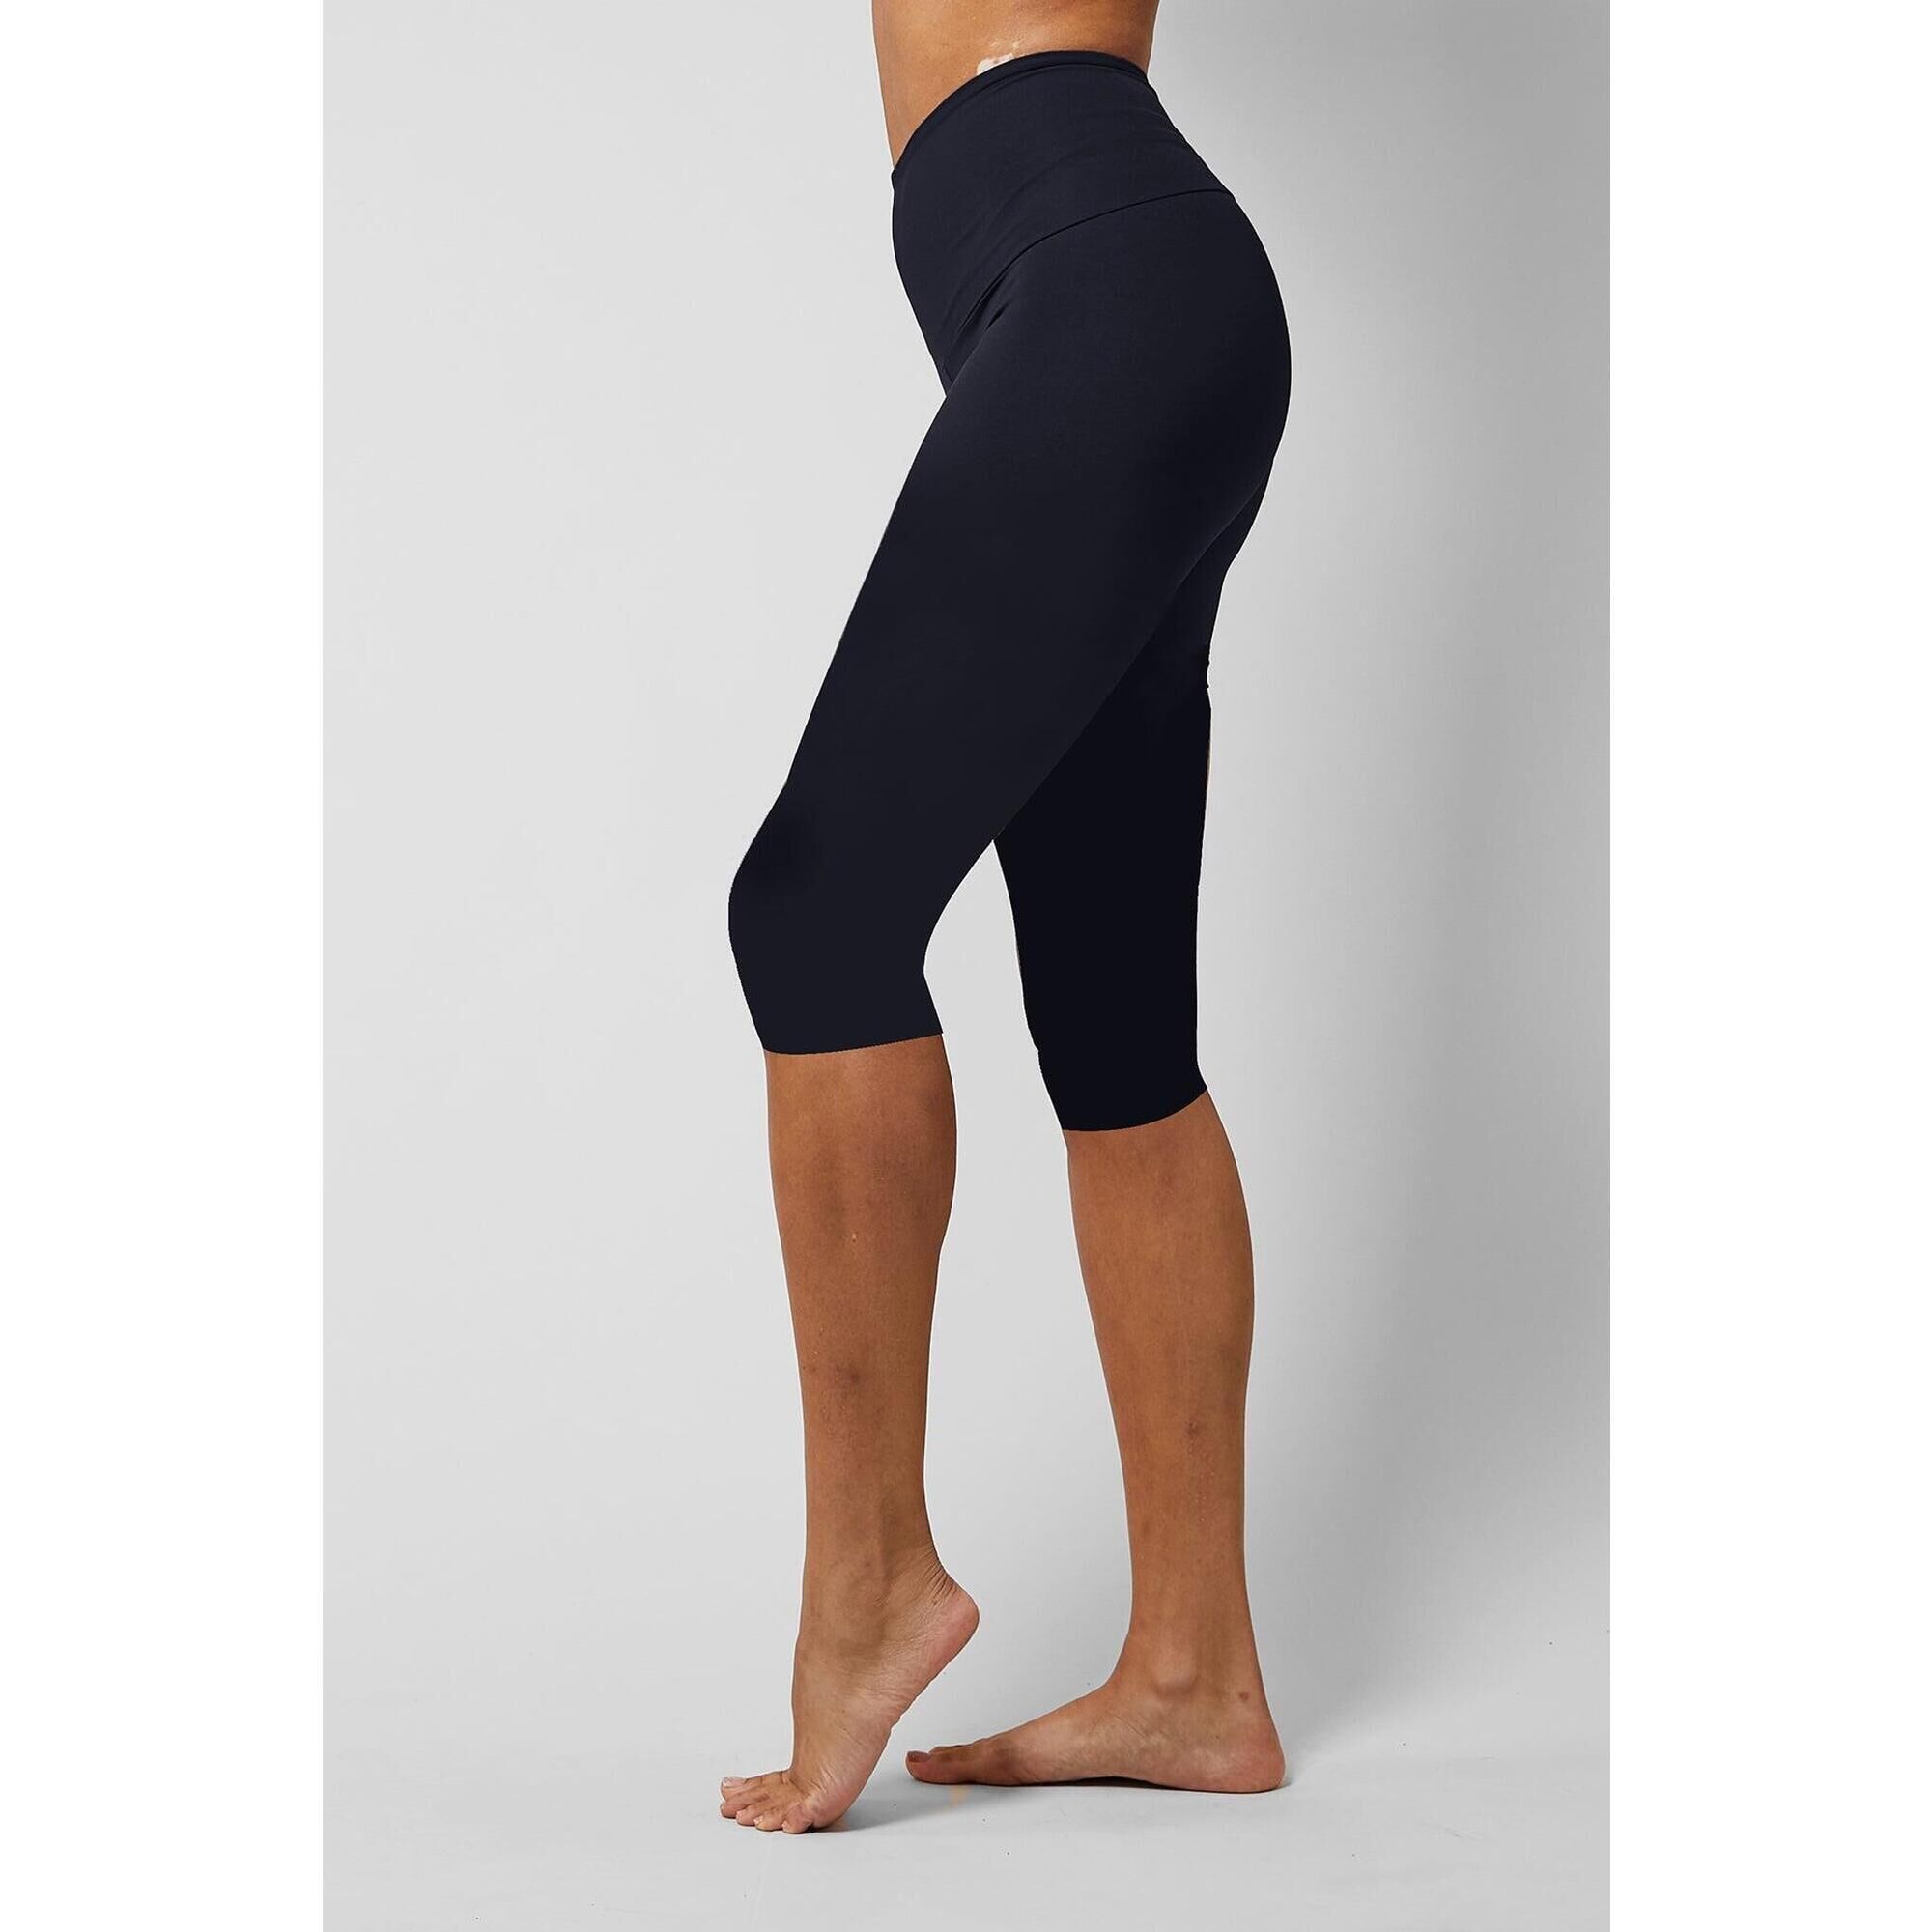 TLC Sport Performance High Tummy Control Extra Strong Compression